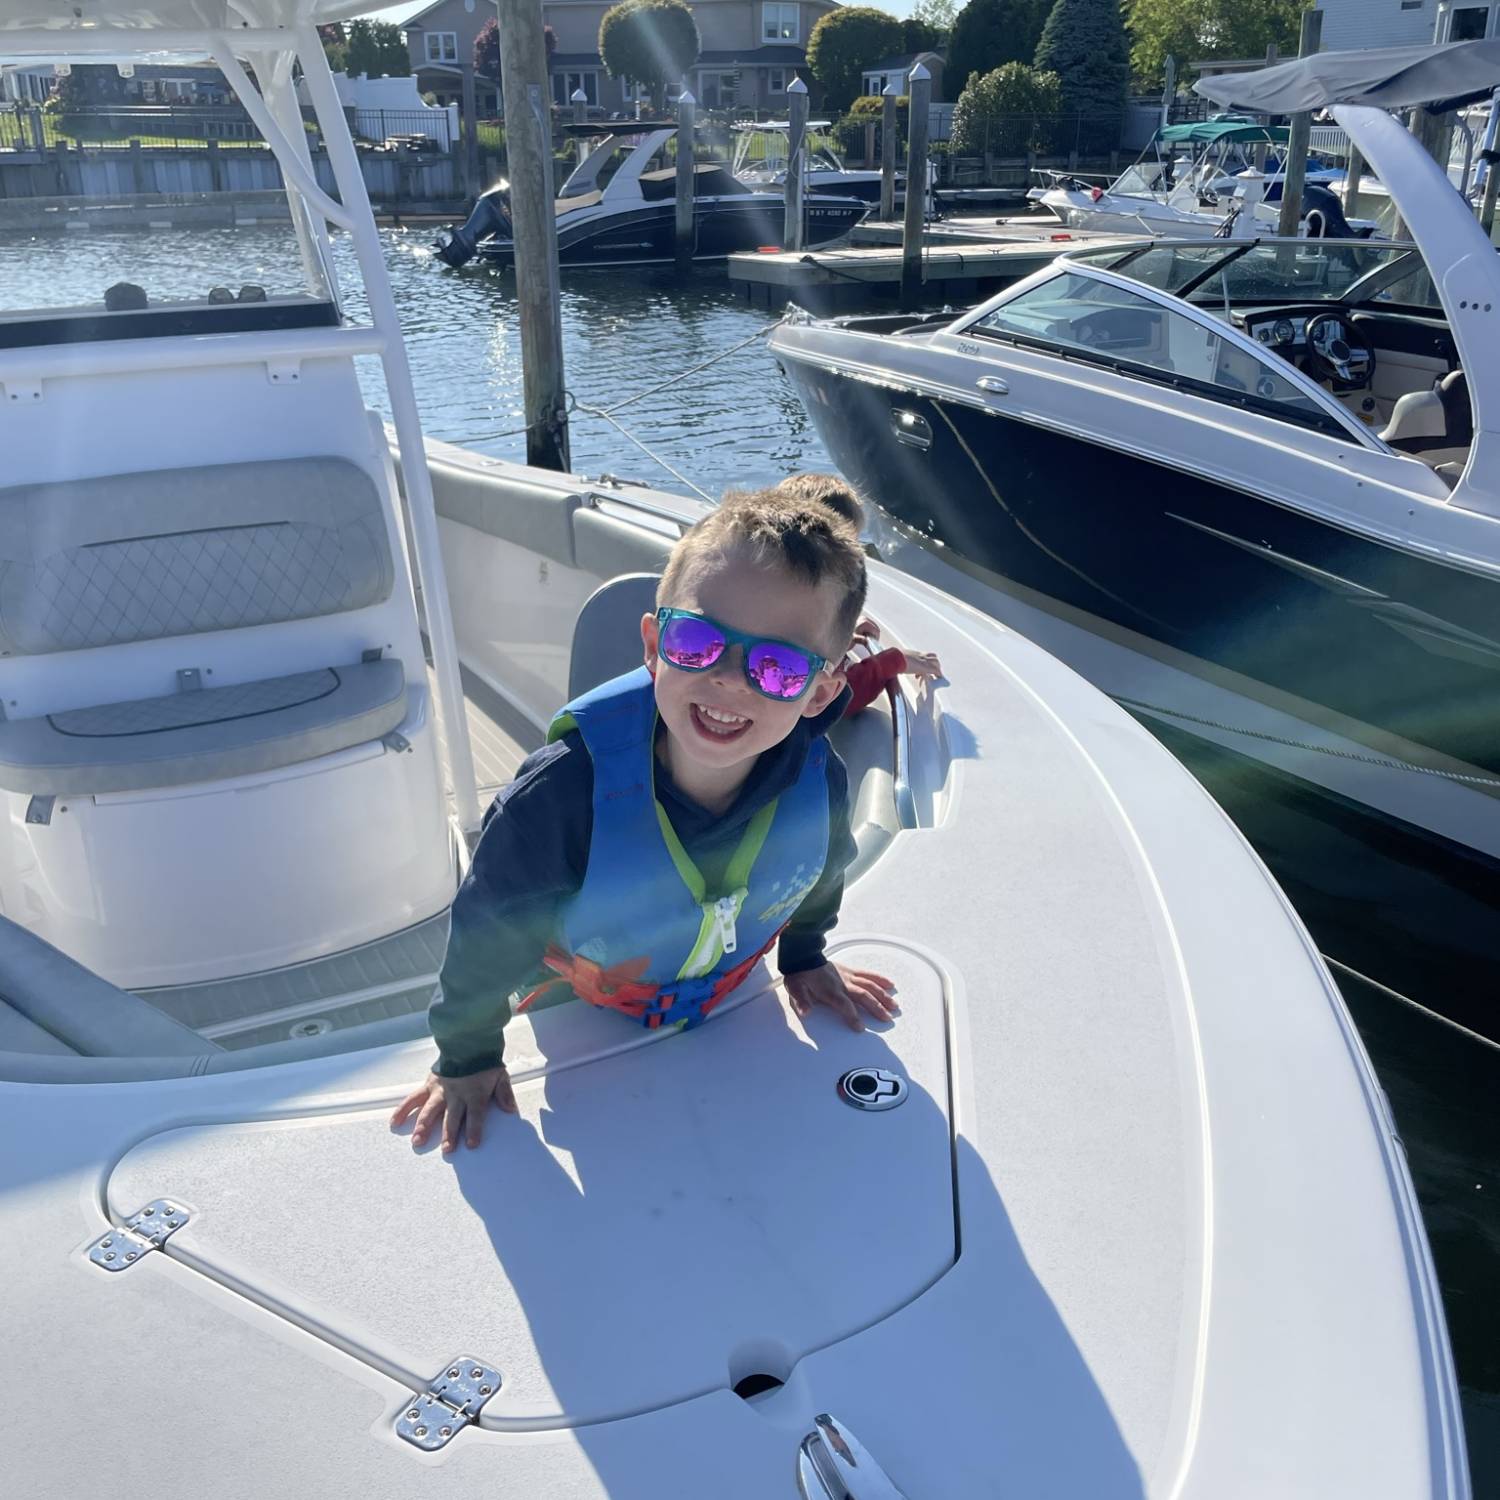 Title: Sunday fun days - On board their Sportsman Open 232 Center Console - Location: Massapequa, New York. Participating in the Photo Contest #SportsmanMay2023